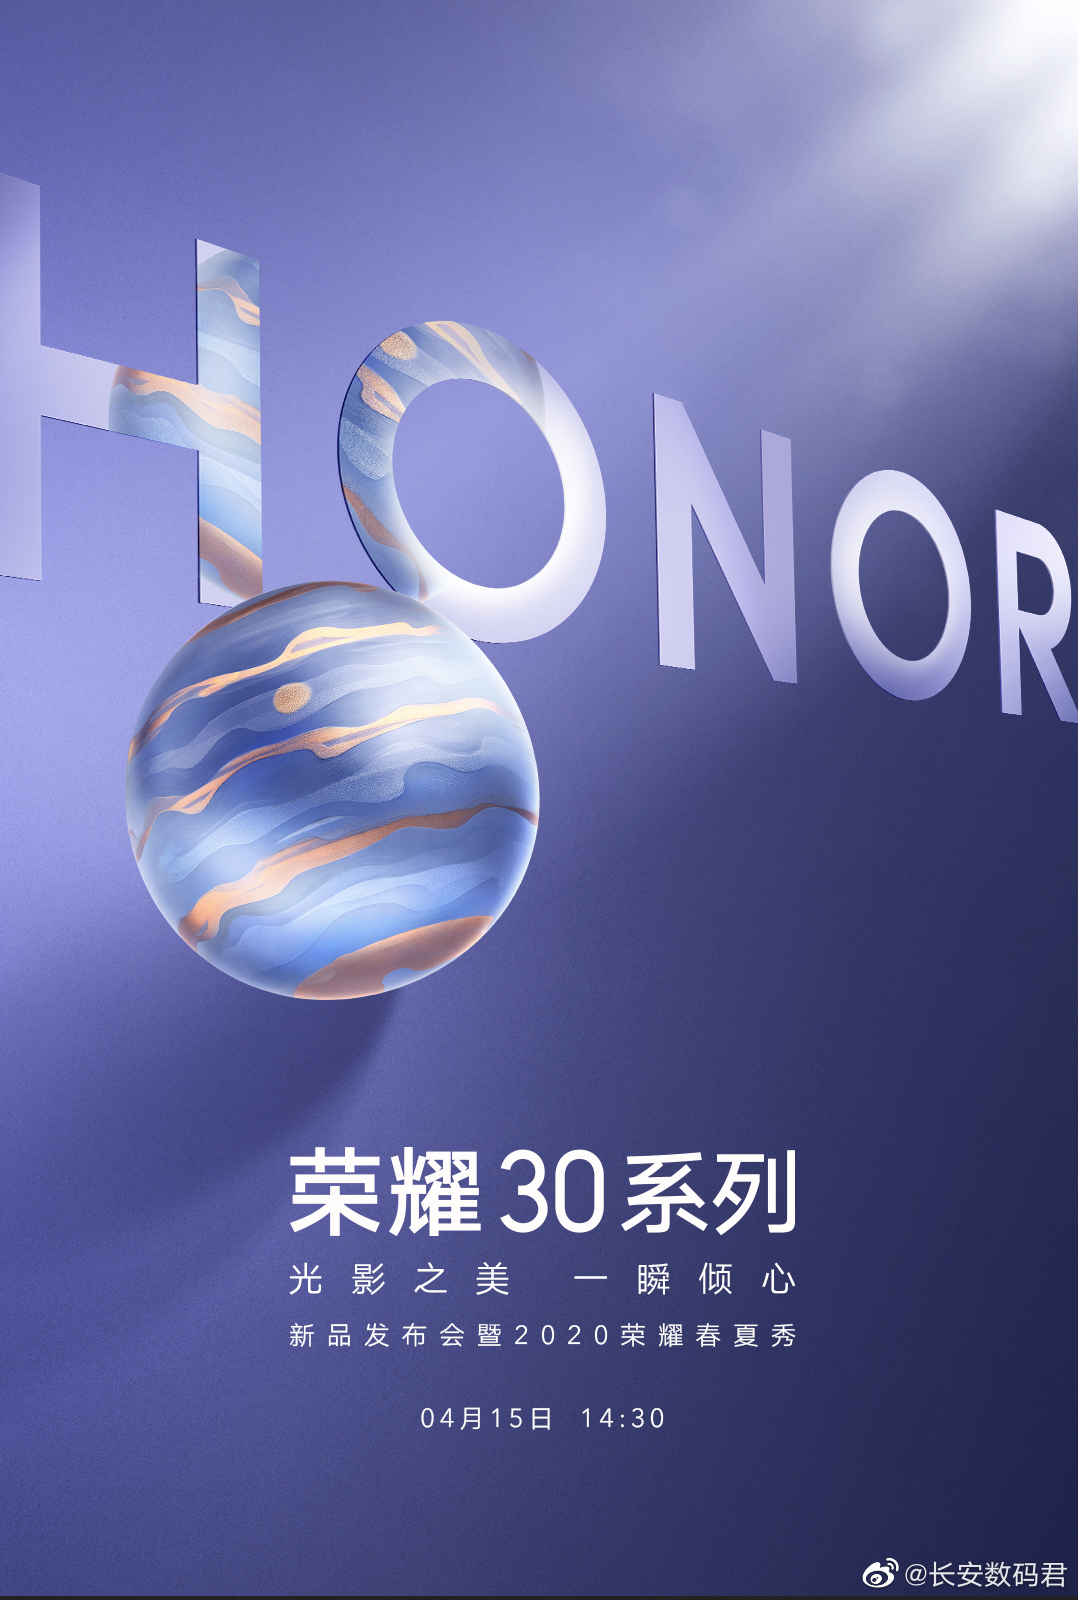 Honor 30 Release Time